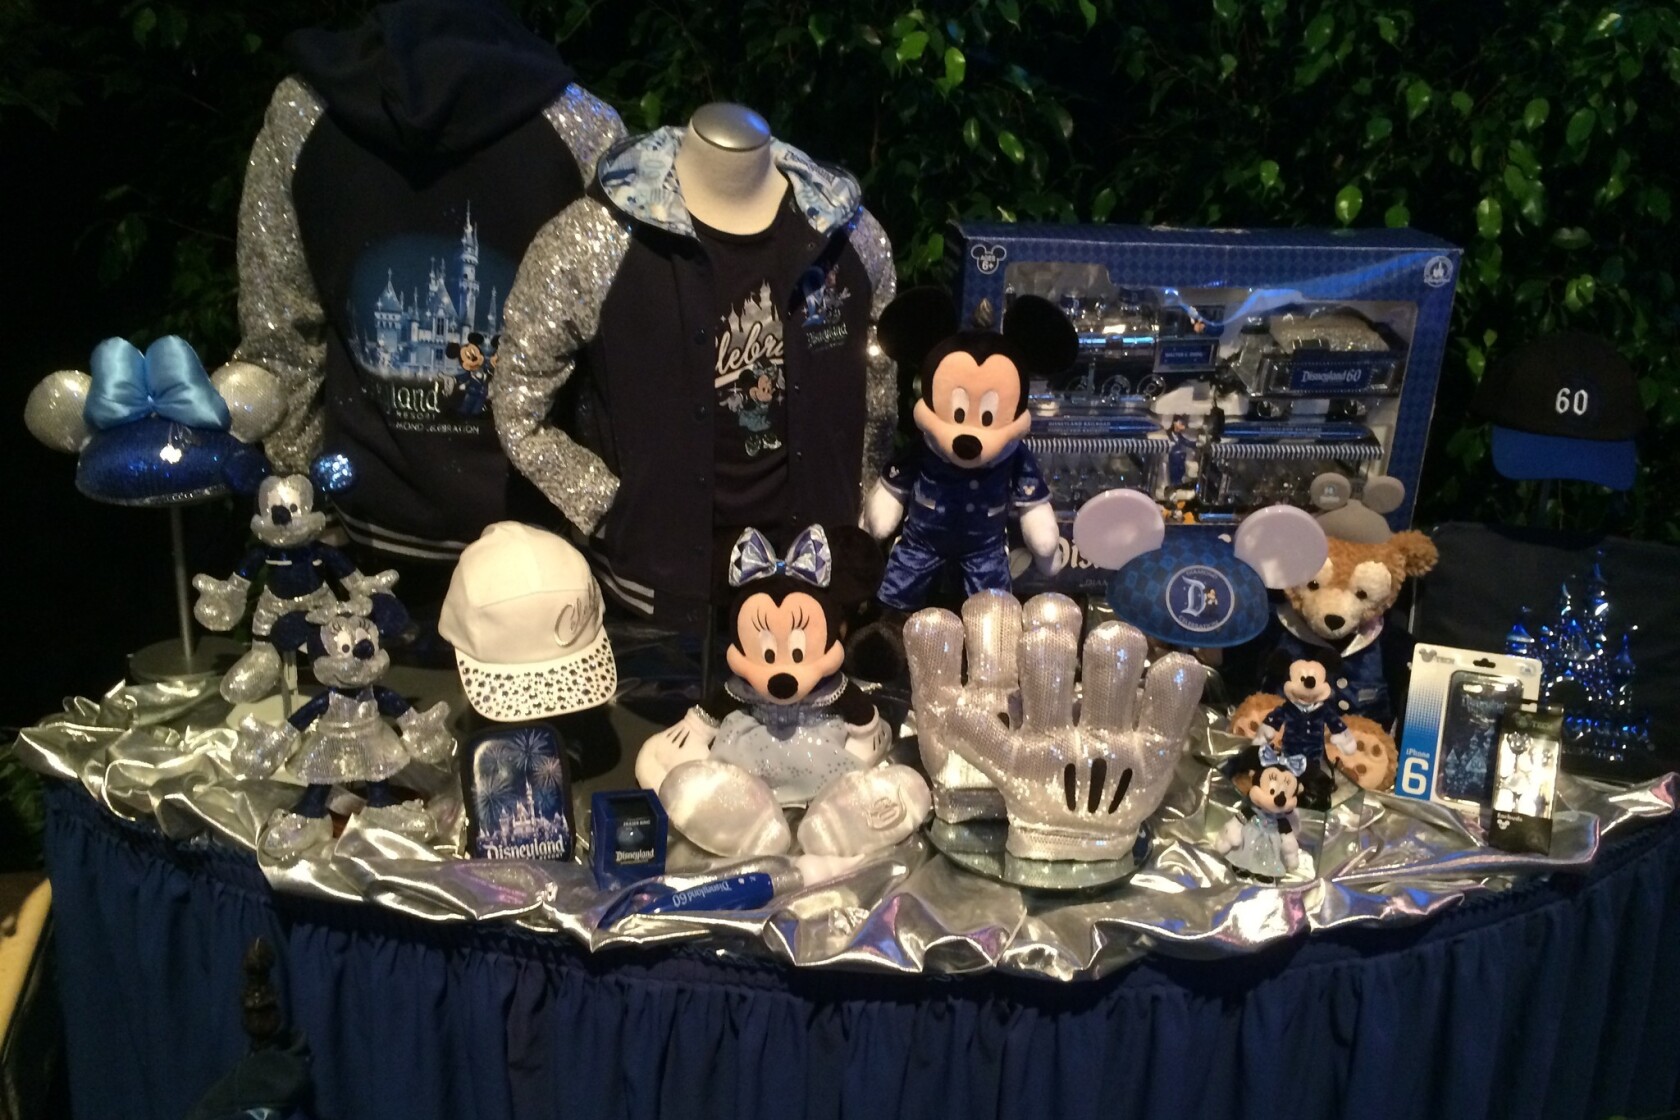 Disneyland to offer new souvenirs, snacks, drinks for 60th anniversary